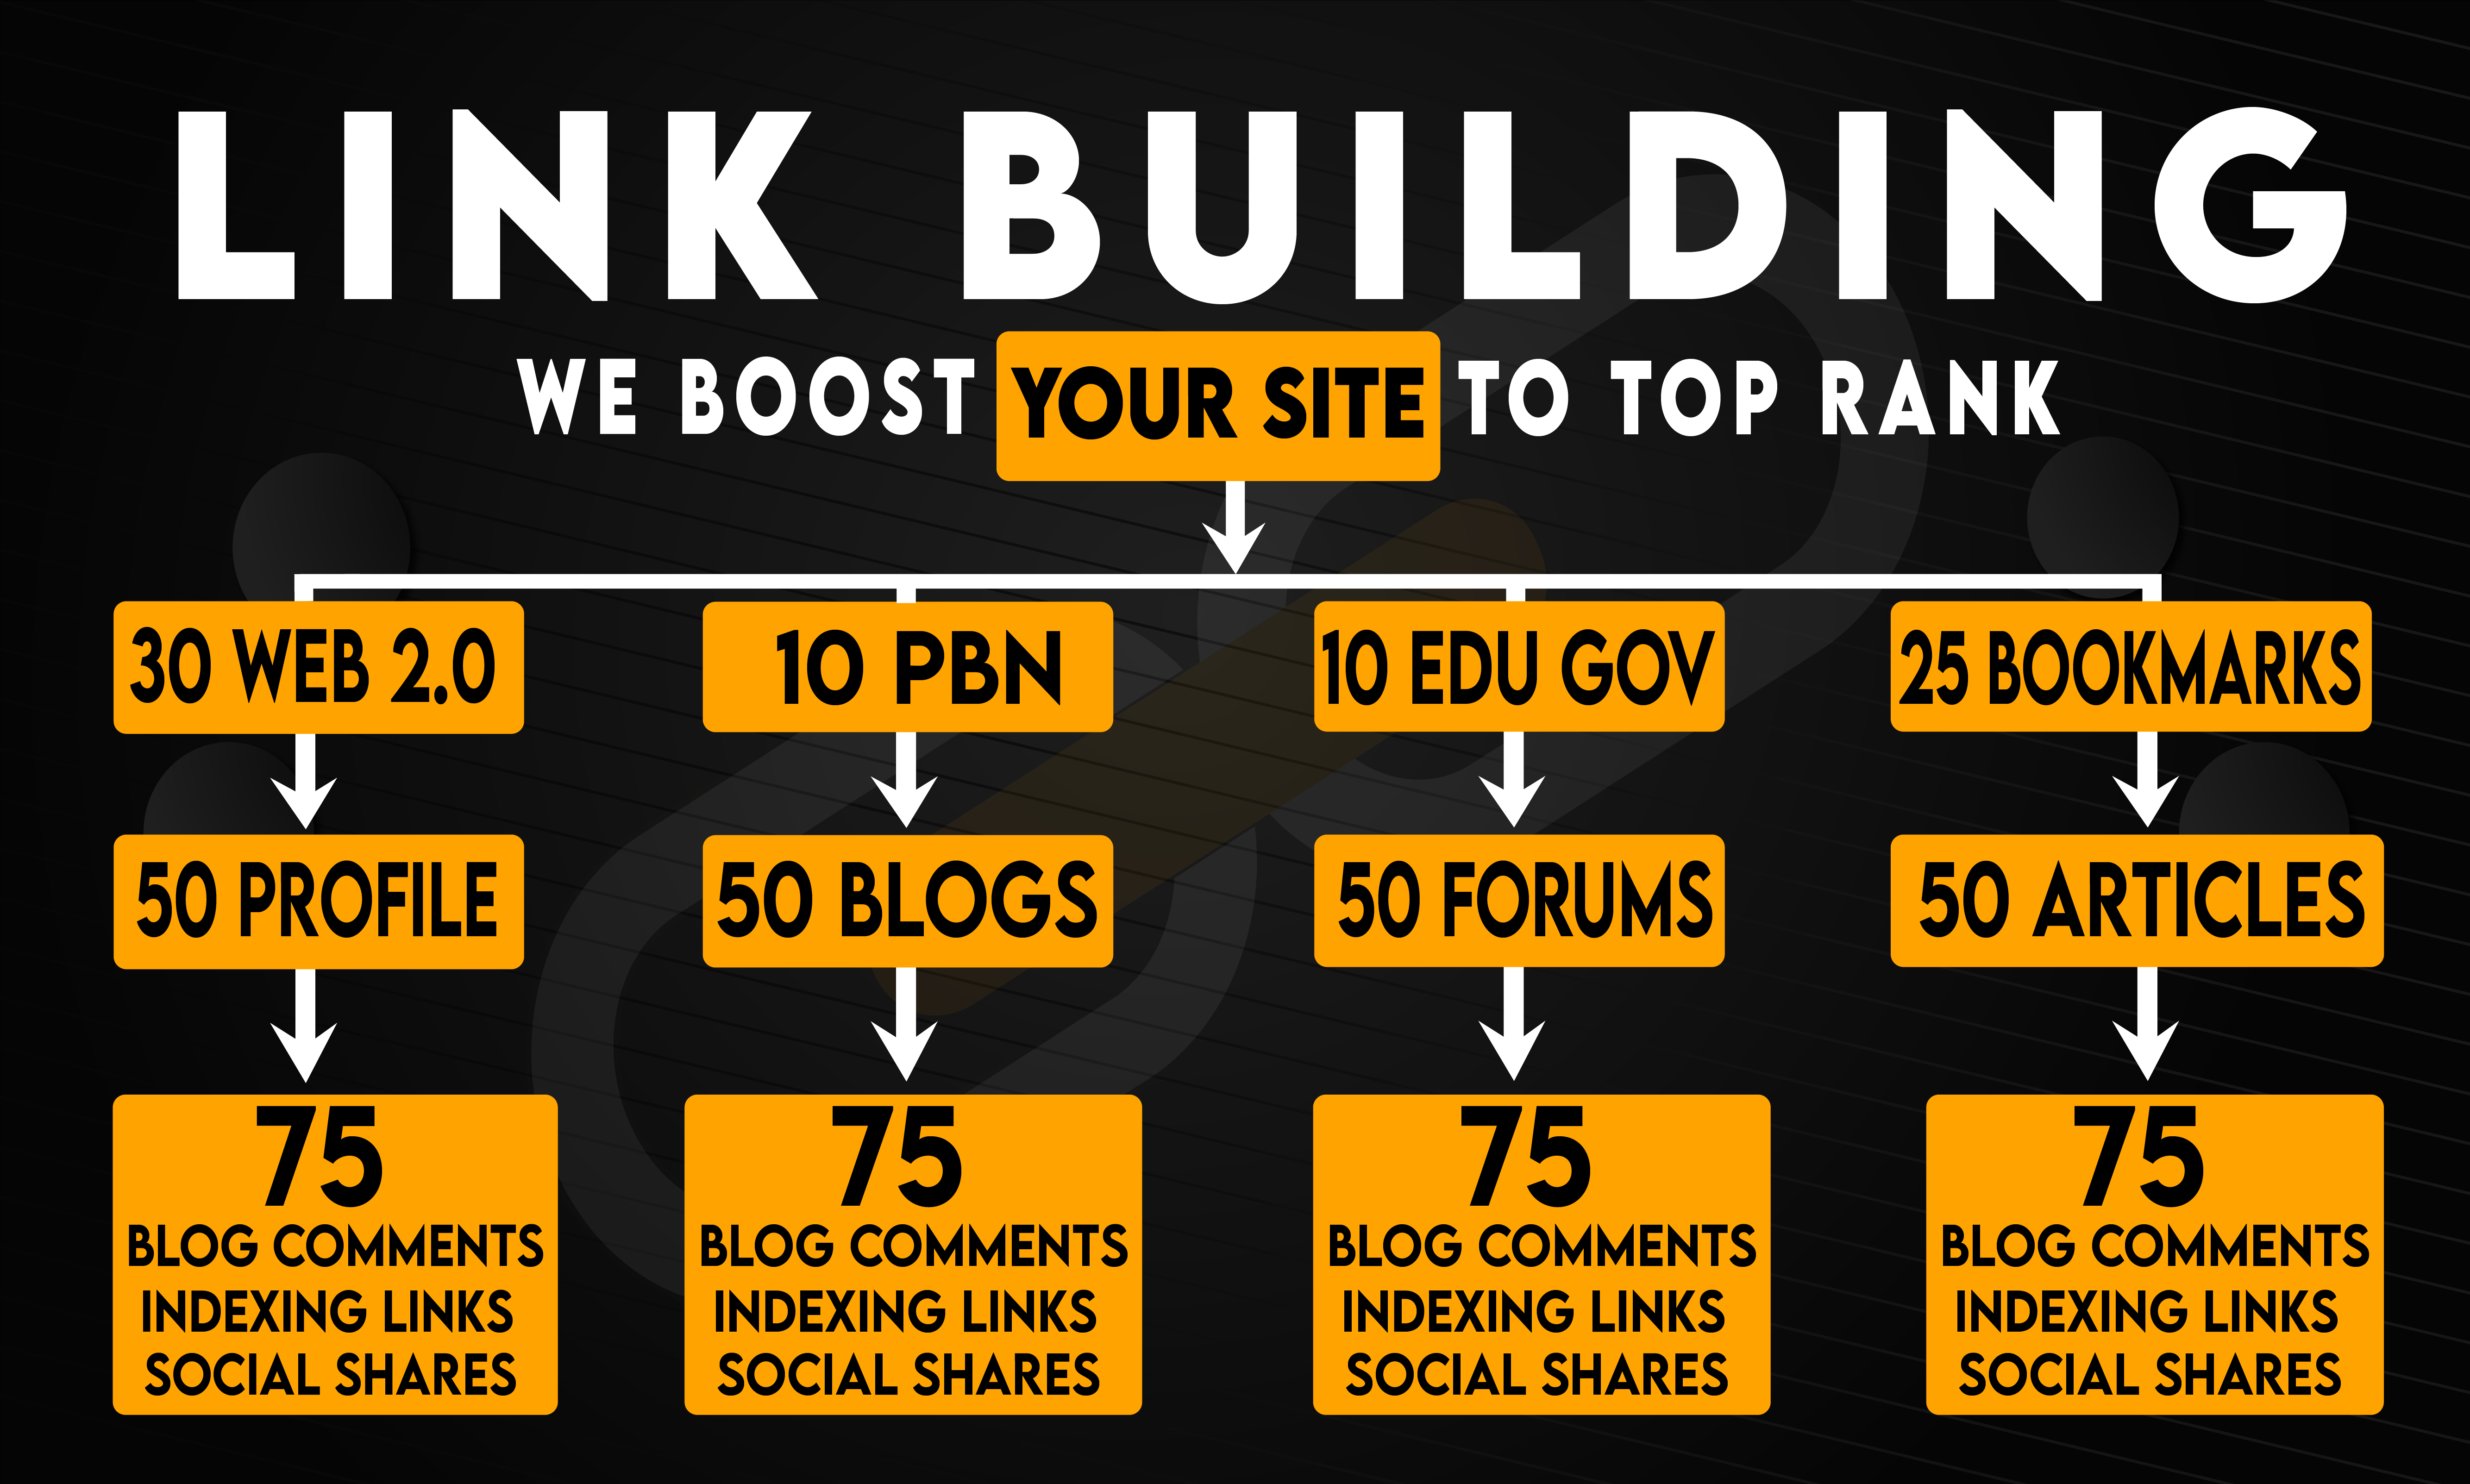 575+ SEO BACKLINKS GET TOP RANKING IN SERP USING 2.0 TIERED STRATEGY WEB 2.0, PBN, BLOGS, COMMENTS